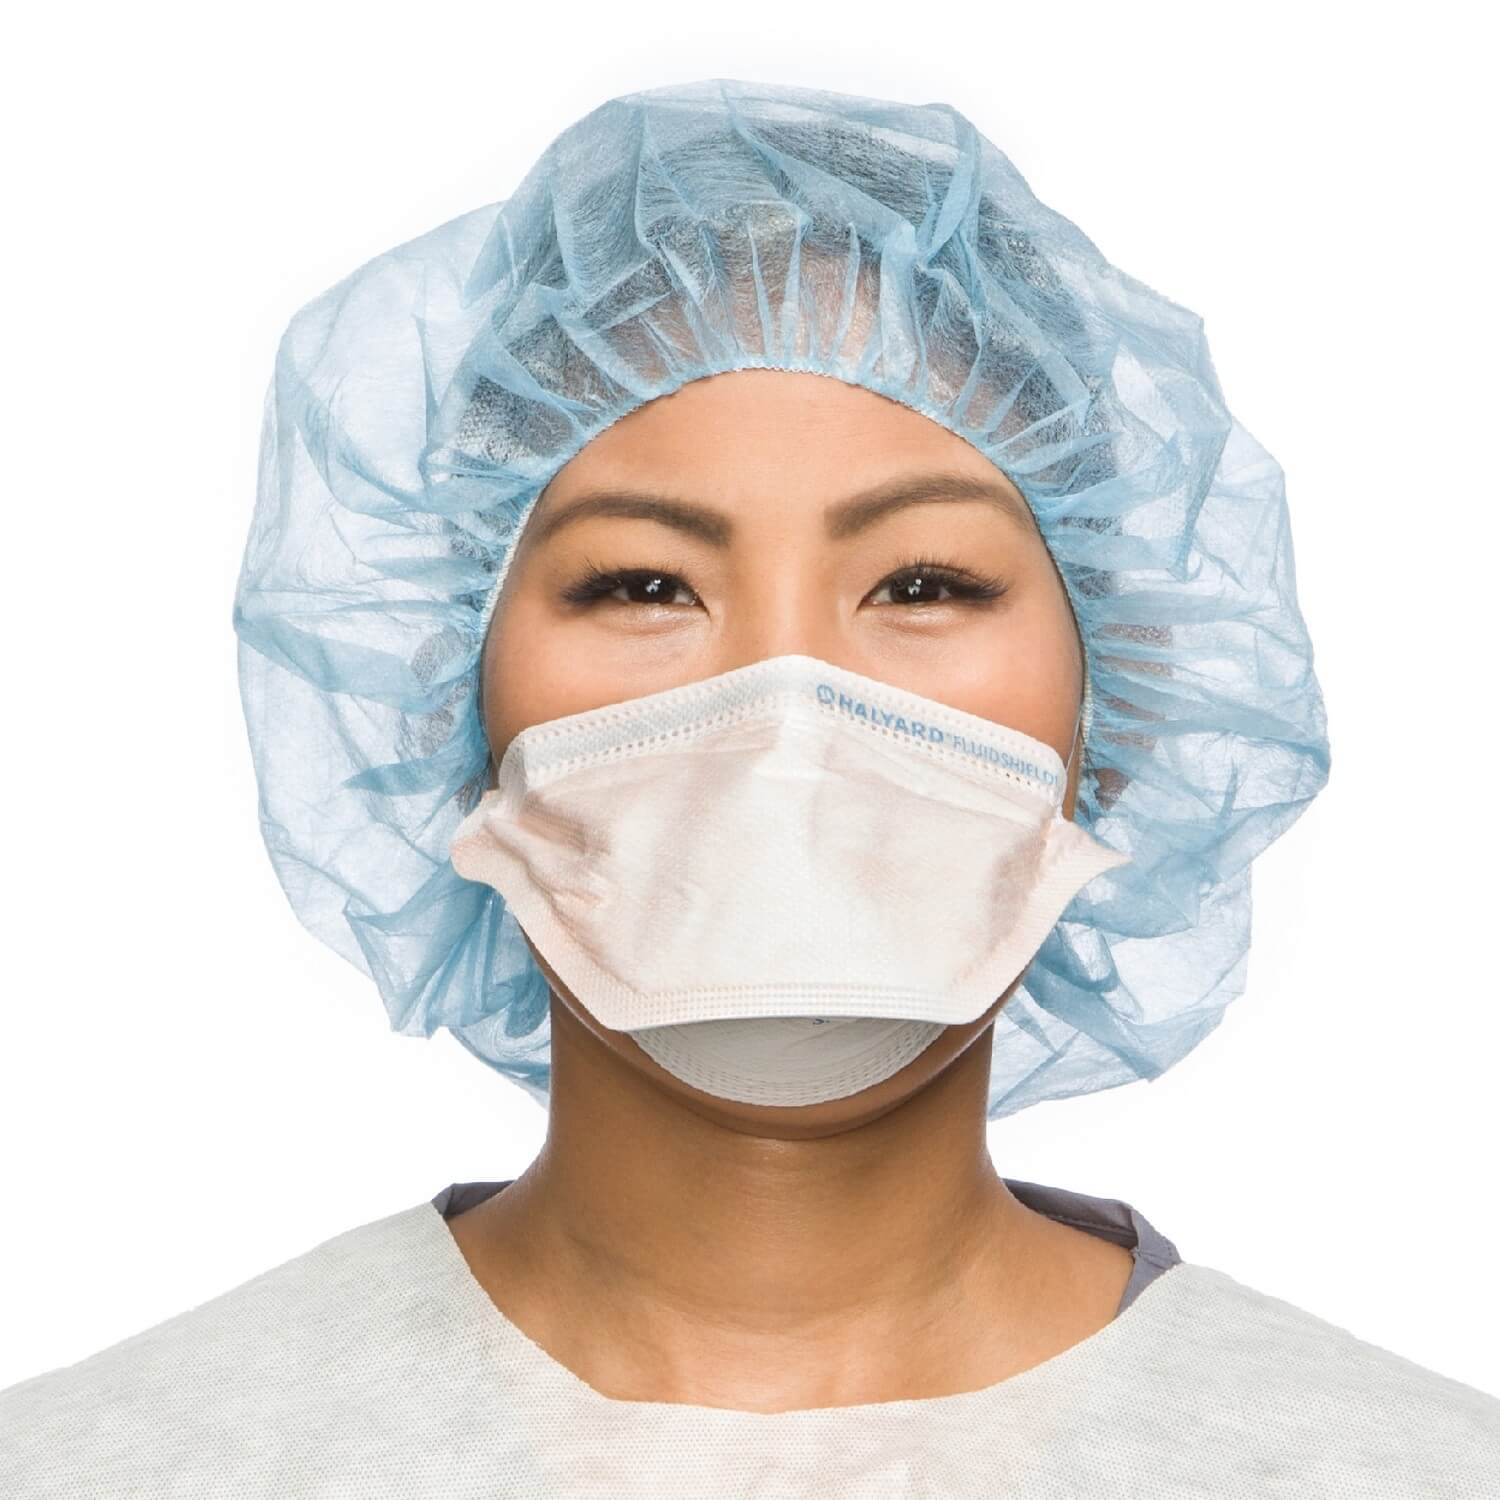 Particulate Respirator, N95, Healthcare, Surgical Mask, Foam Nose Cushion,  Elastic Straps, Large